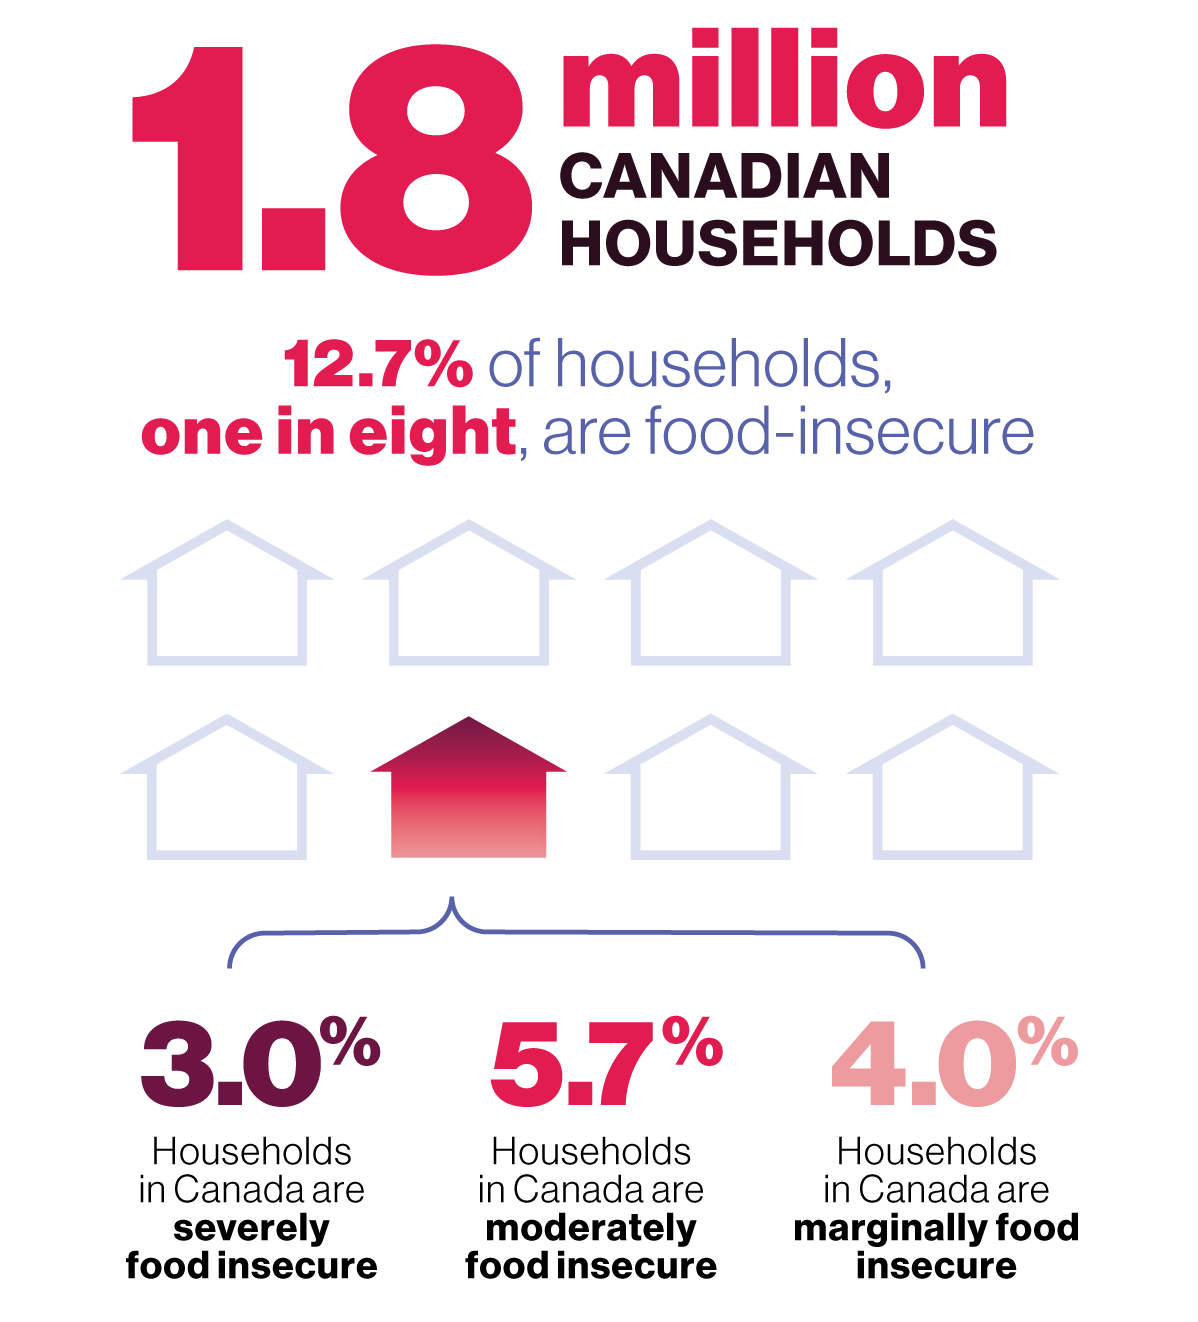 1 in 8 households are food insecure